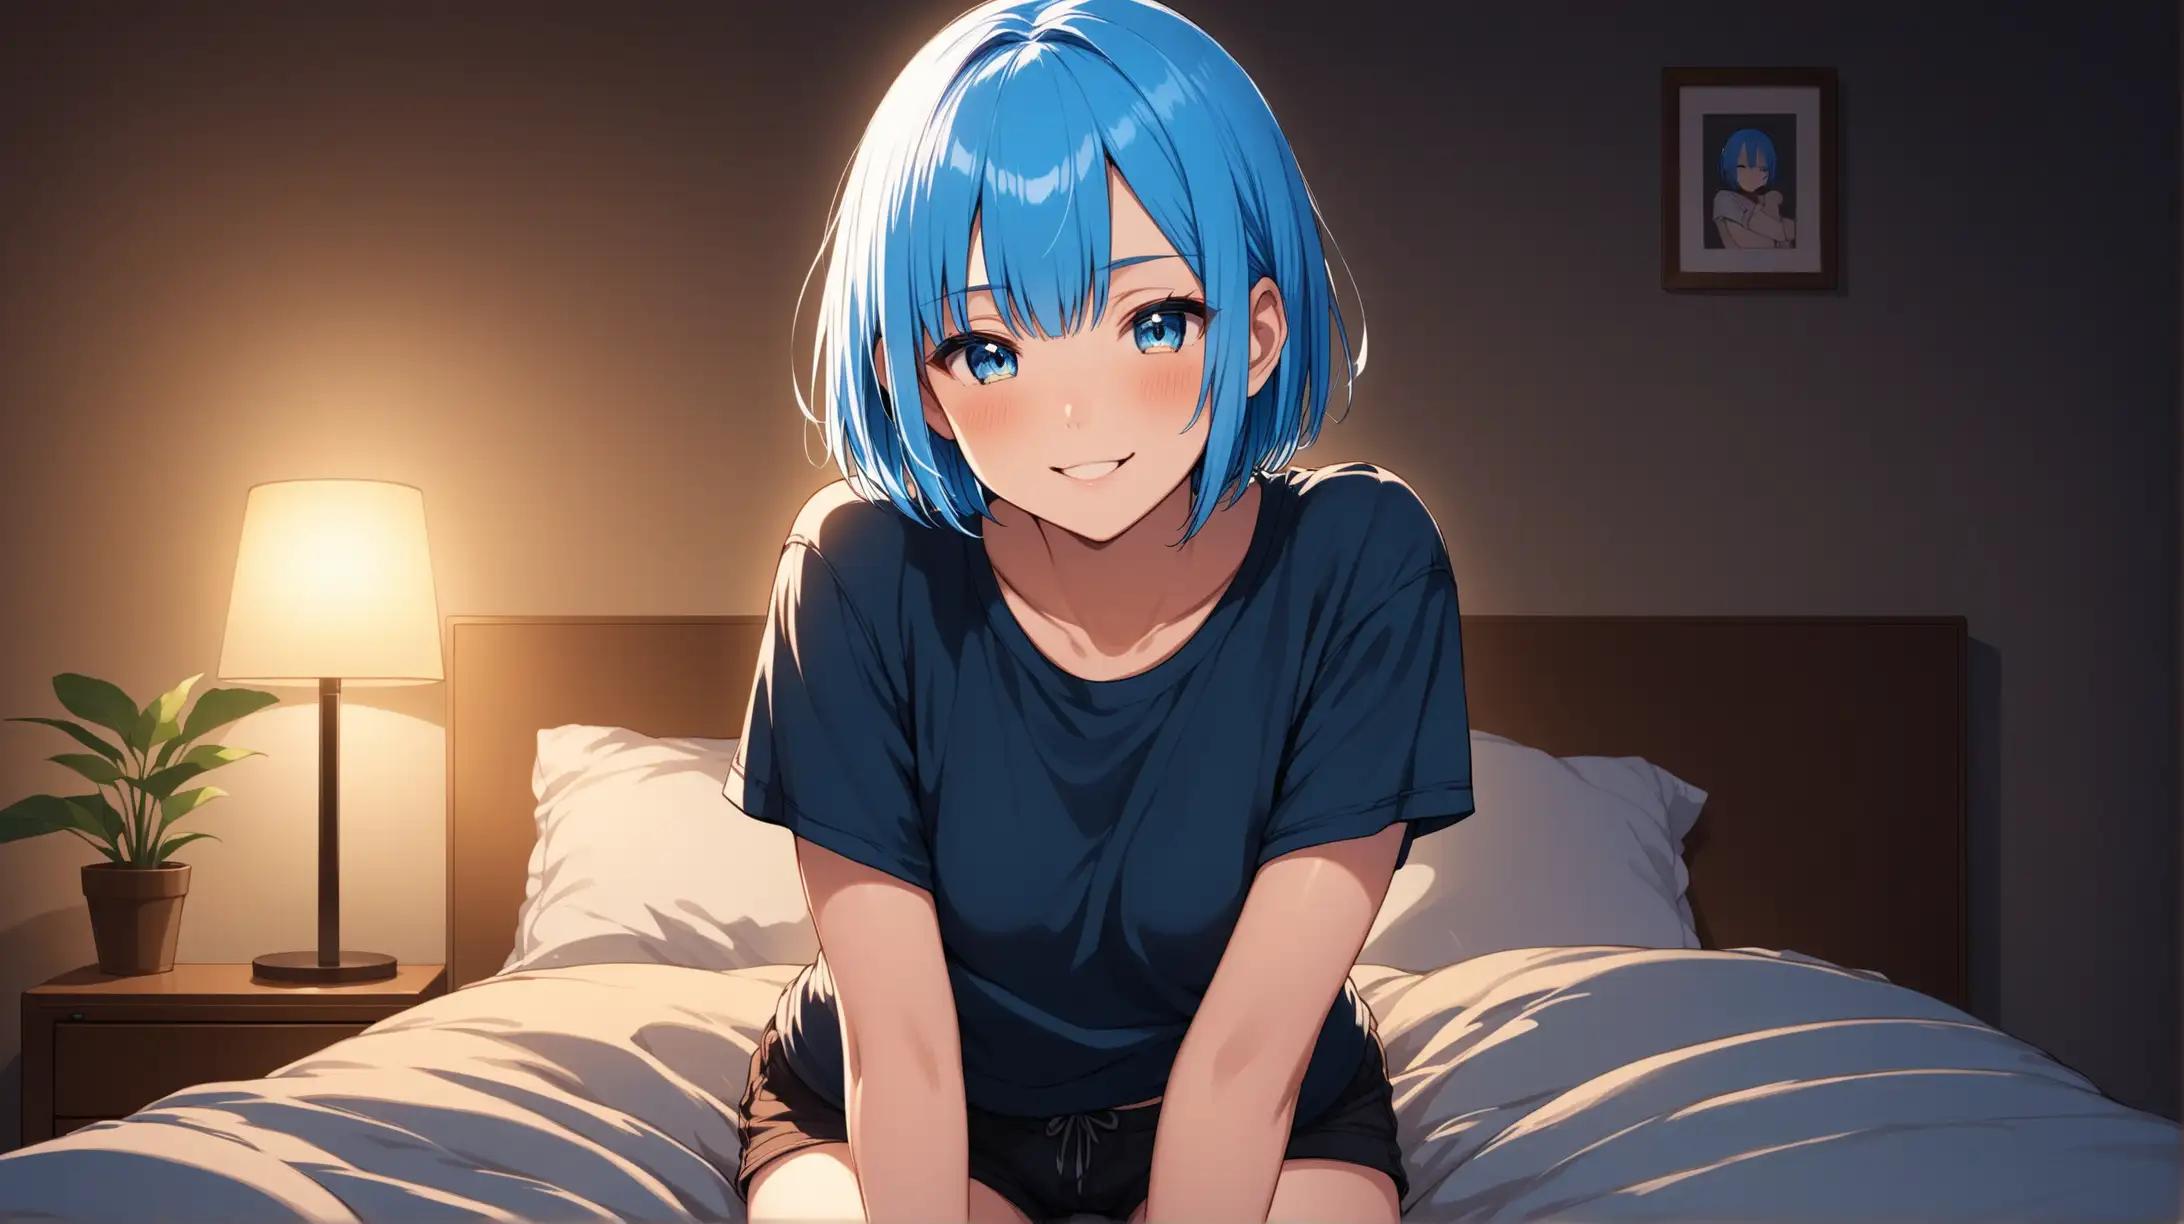 Draw the character Rem, high quality, in a relaxed pose, indoors, dimly lit, at night, with a bed in the background, wearing shorts and a shirt, smiling lovingly at the viewer